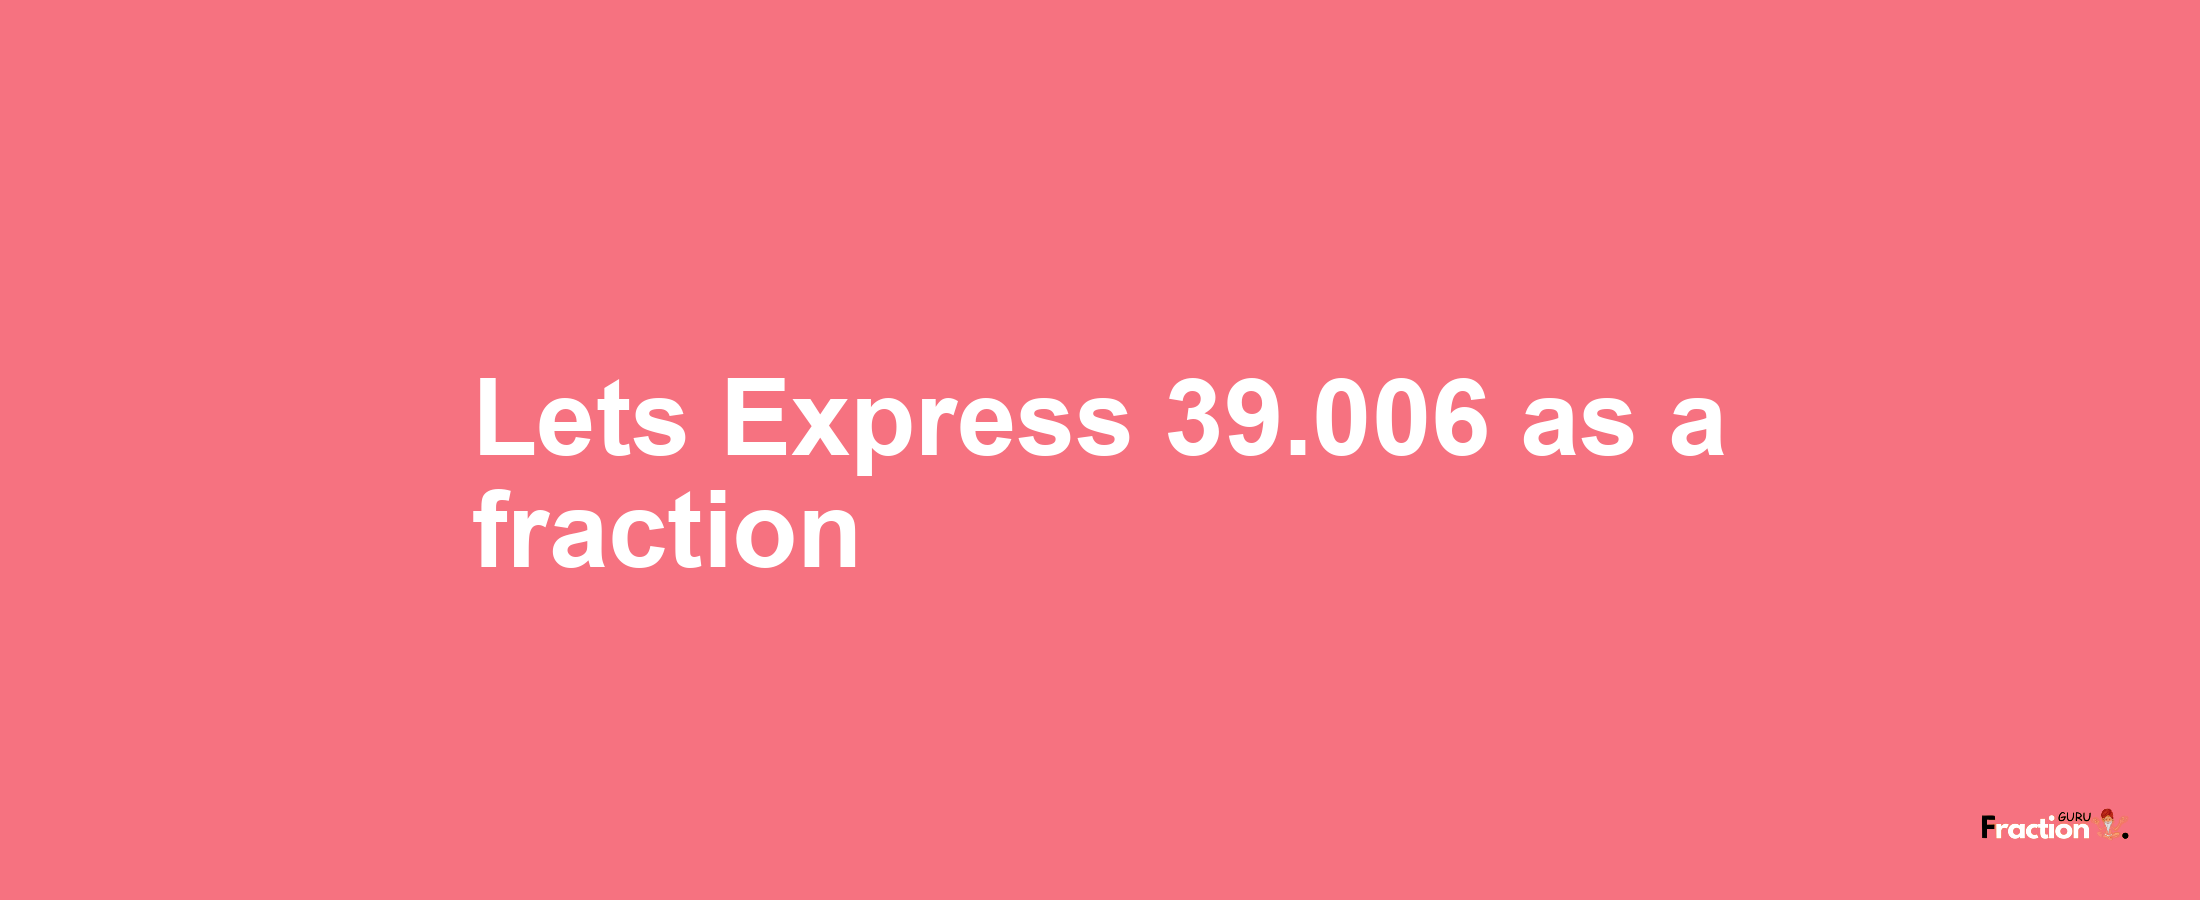 Lets Express 39.006 as afraction